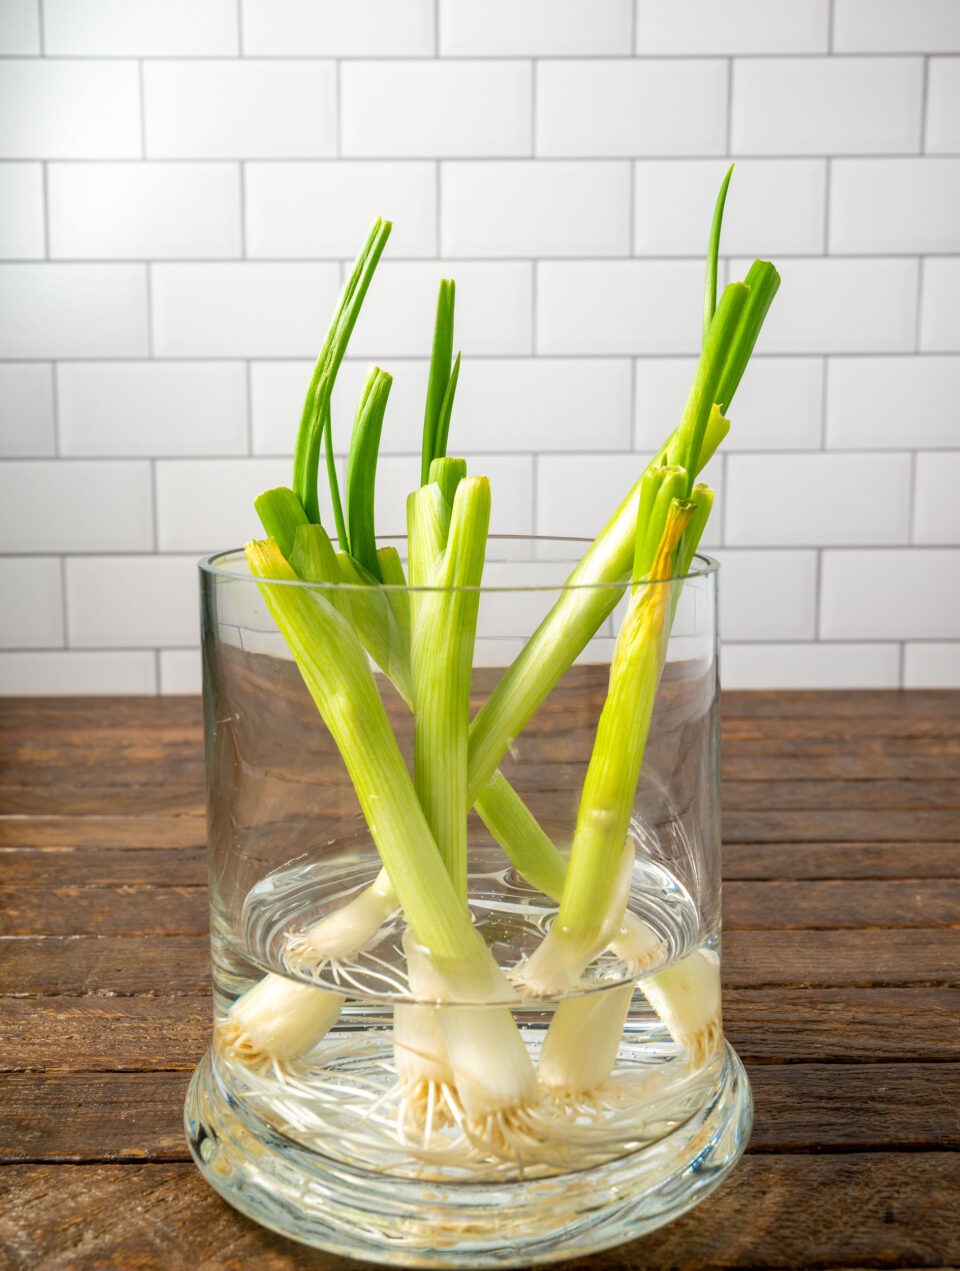 green onion growing in a vase